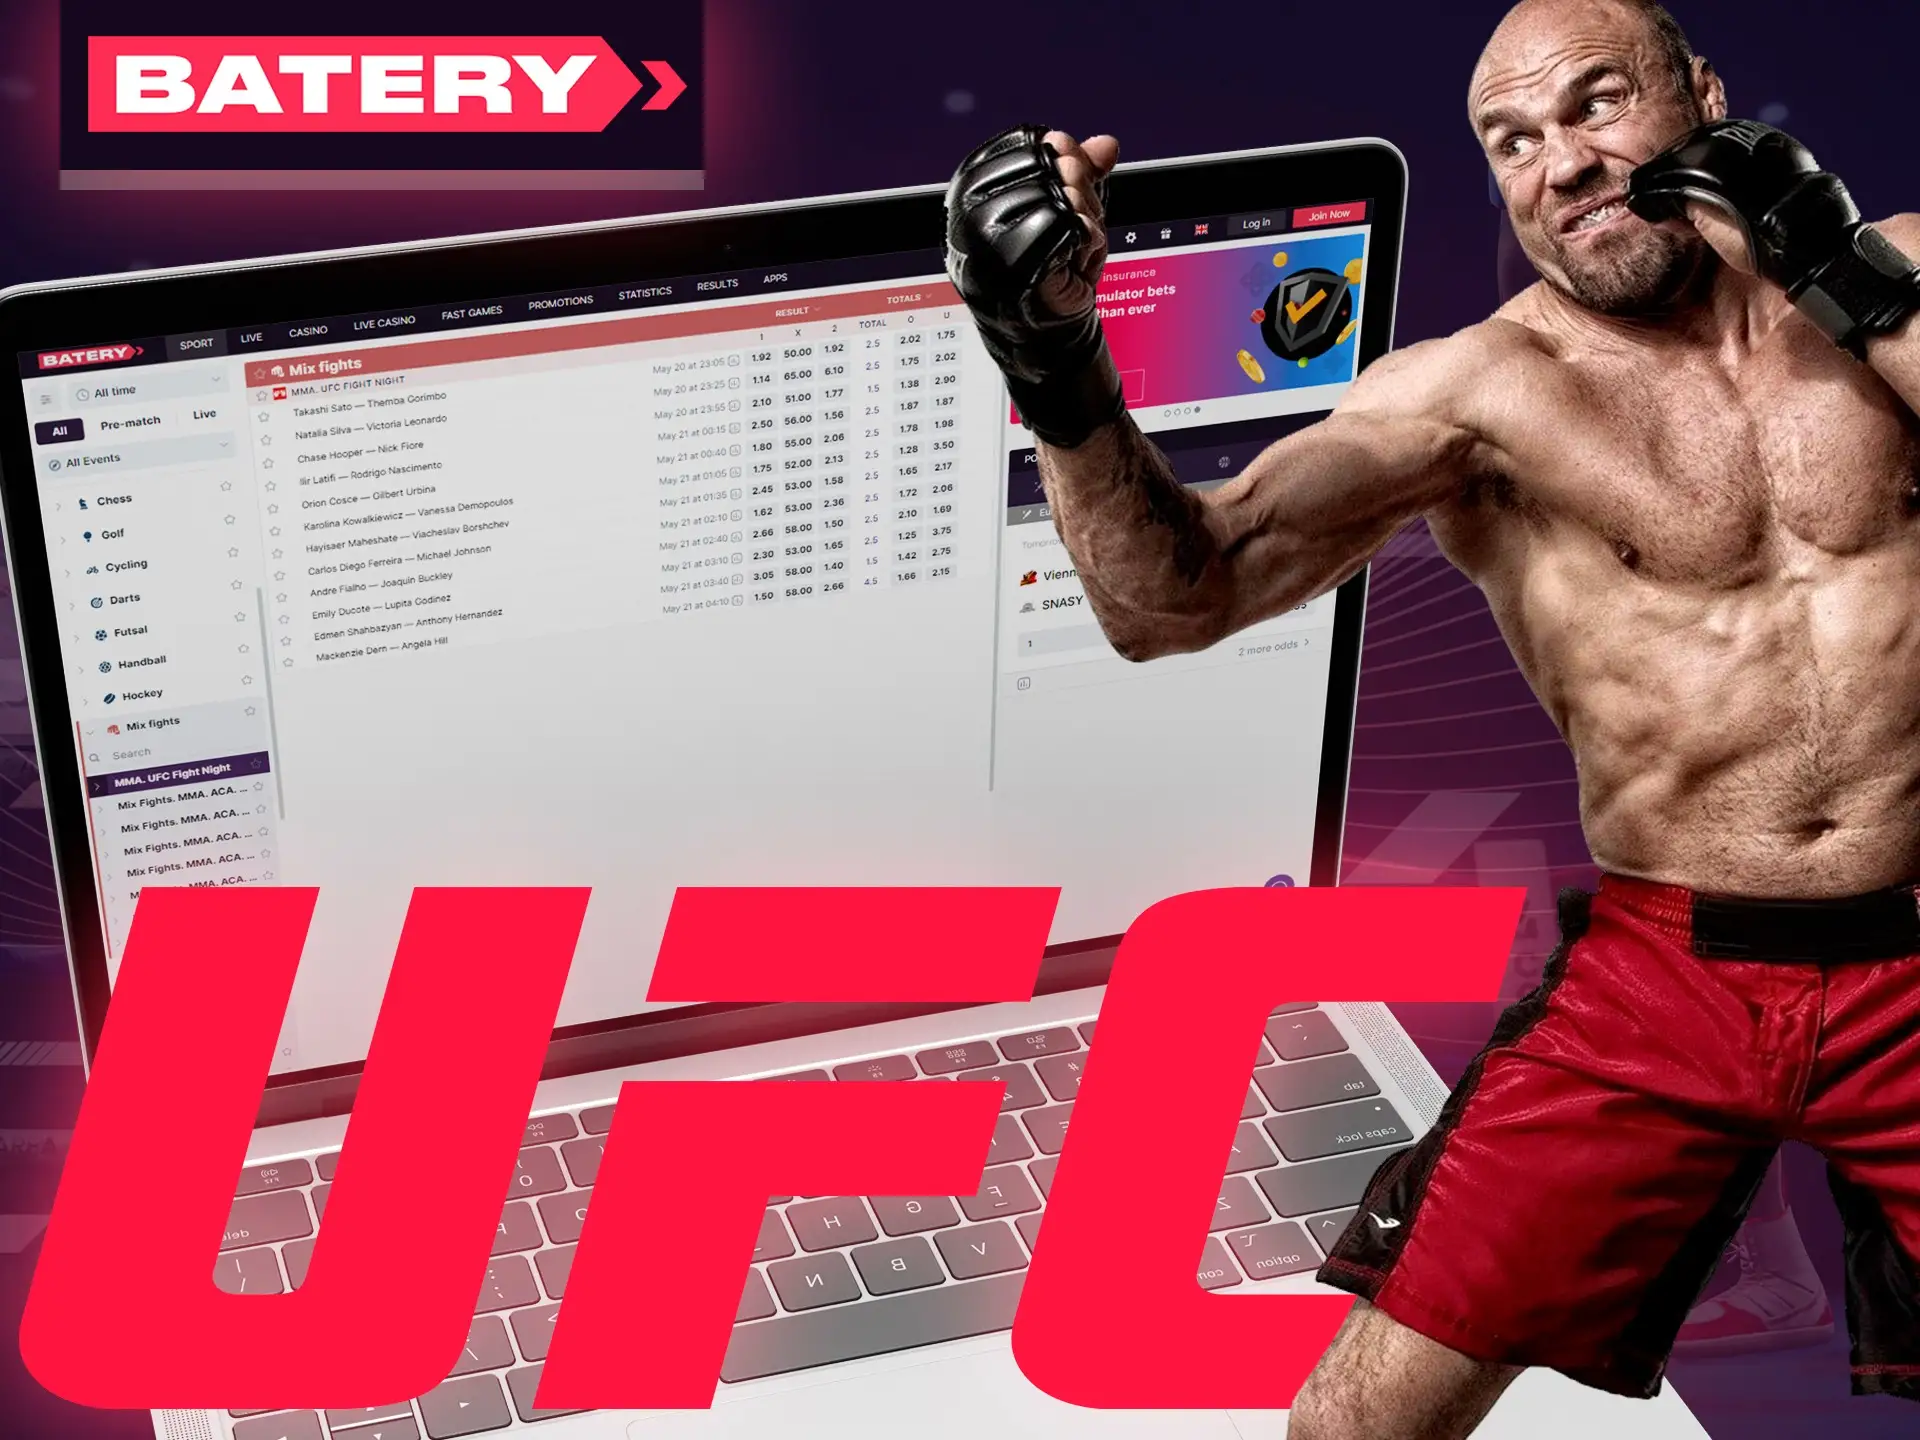 Bet on legendary UFC fighters at Batery.